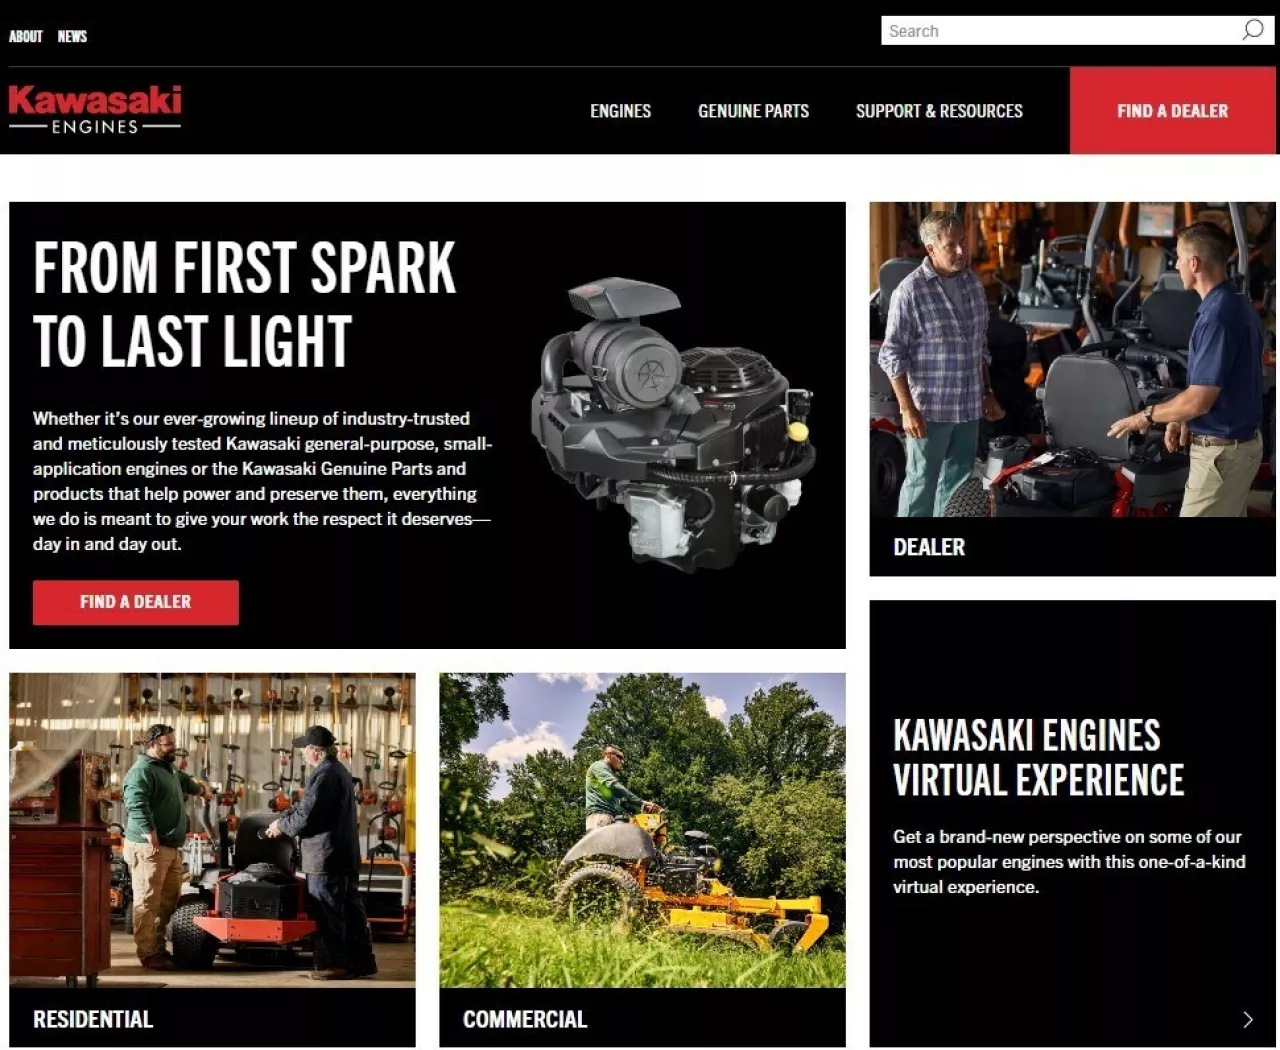 Kawasaki Engines today announced the relaunch of KawasakiEnginesUSA, the company’s consumer website. The updated site provides commercial and residential customers with easy-to-find and complete information about Kawasaki’s lineup of engines, Kawasaki Genuine Parts and products, and a dealer locator. img#1